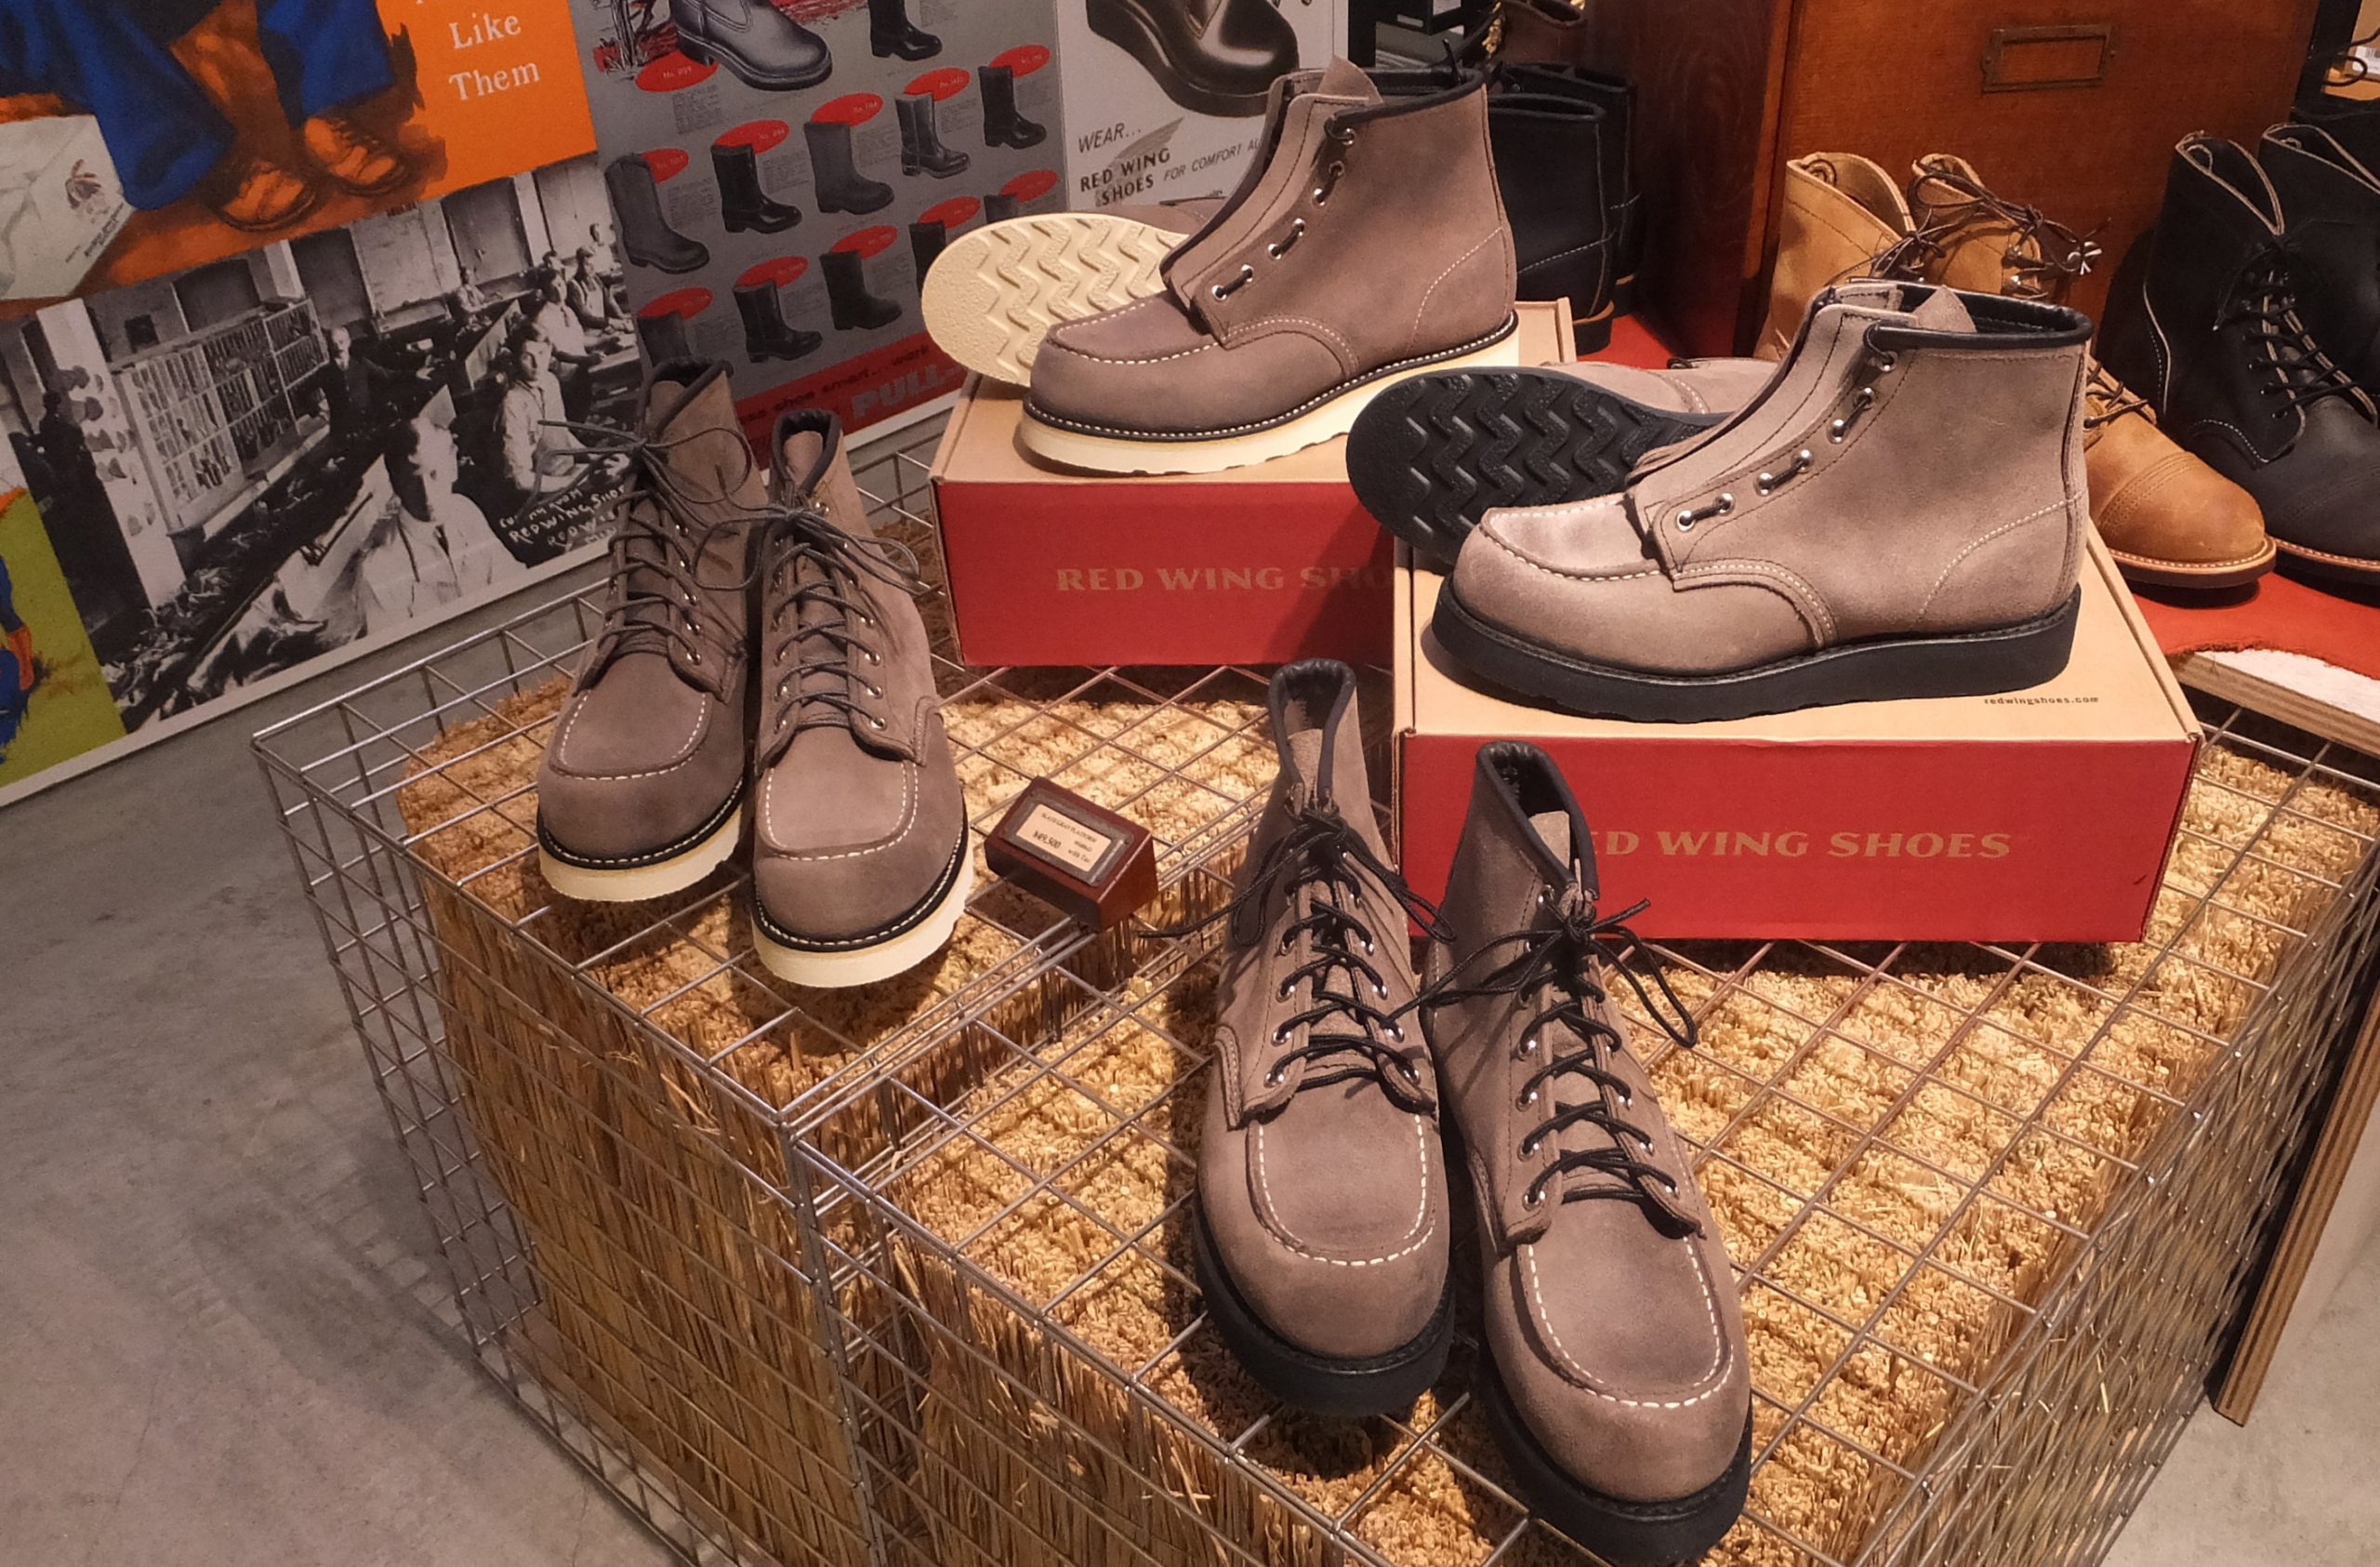 fragment red wing popbyjun 渋谷パルコ parco